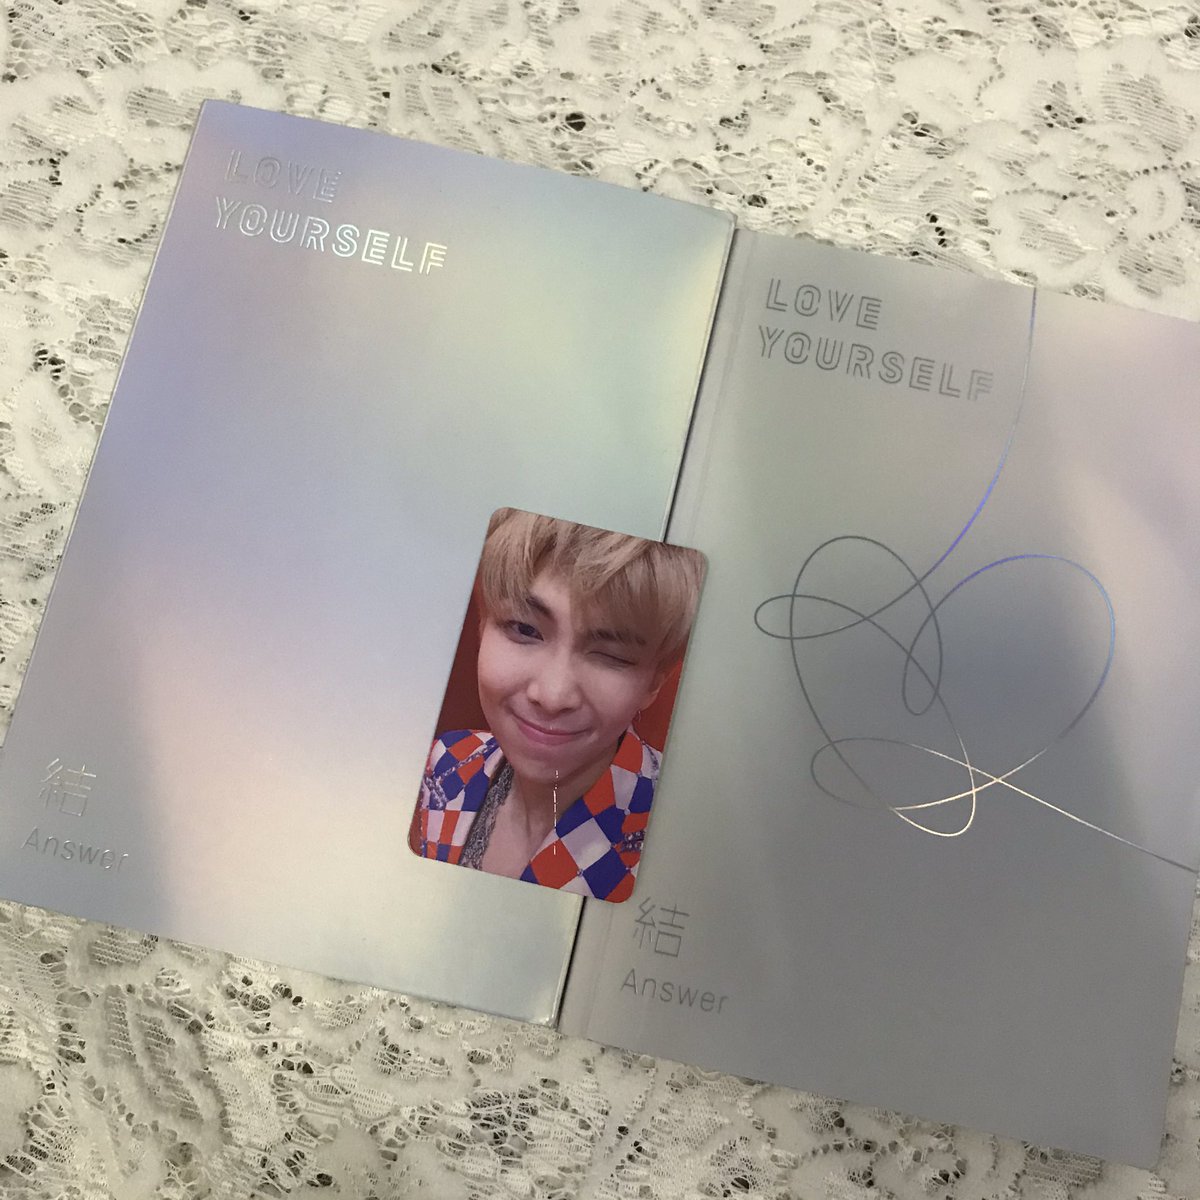 Bts Love yourself: Answer S ver with namjoon pc  condition can check photo below Have Namjoon/RM pc  rm45 incl postage